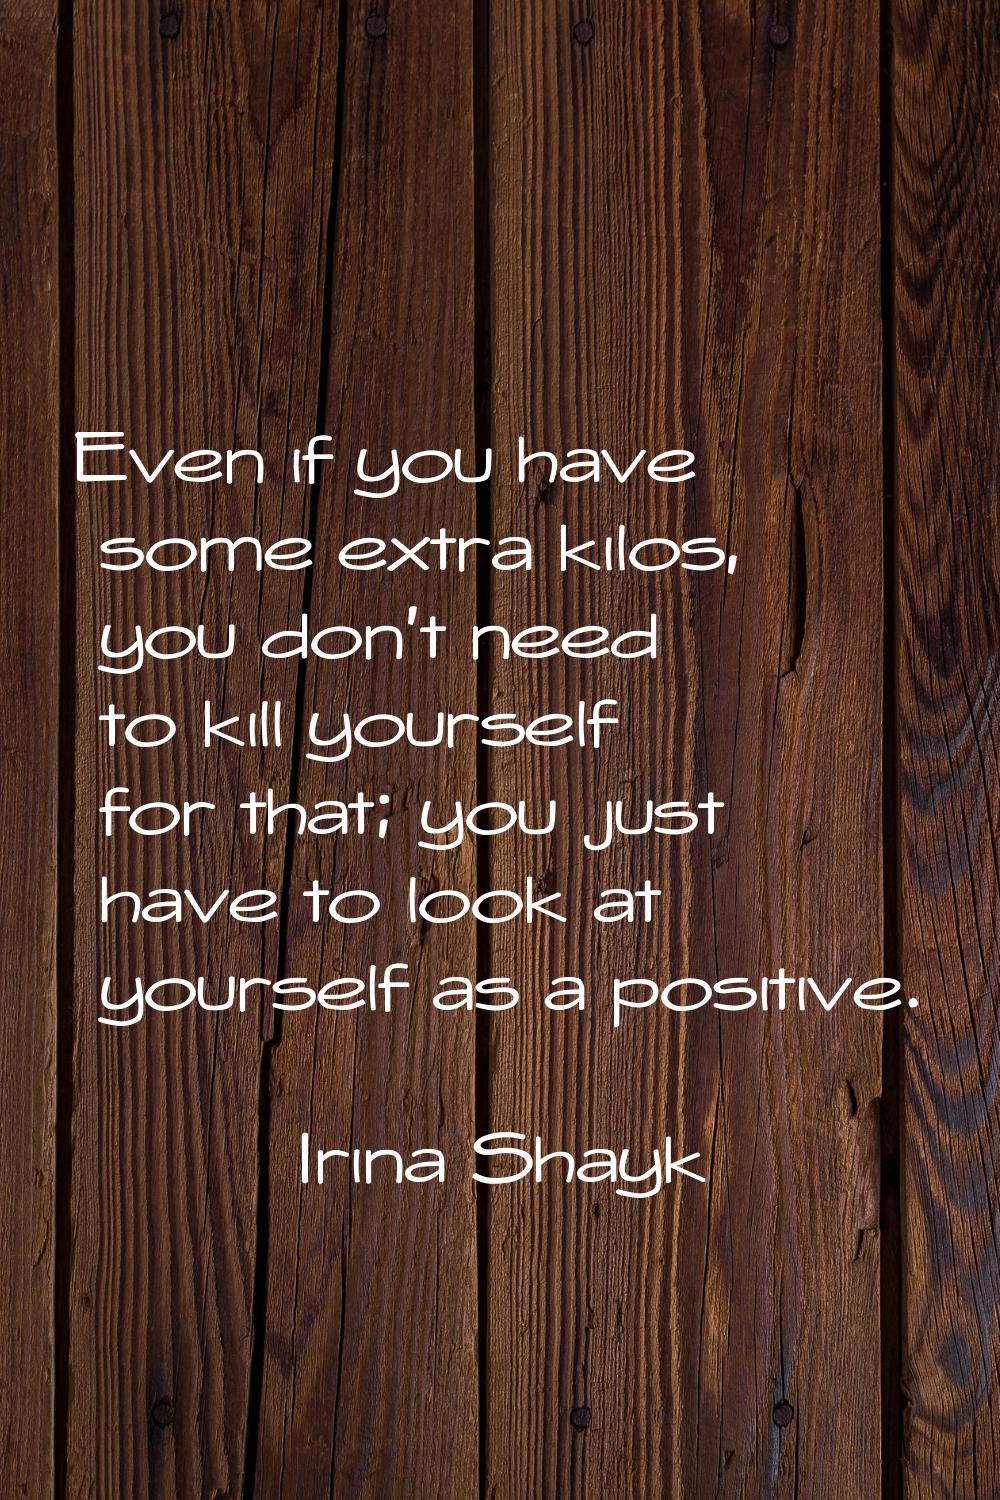 Even if you have some extra kilos, you don't need to kill yourself for that; you just have to look 